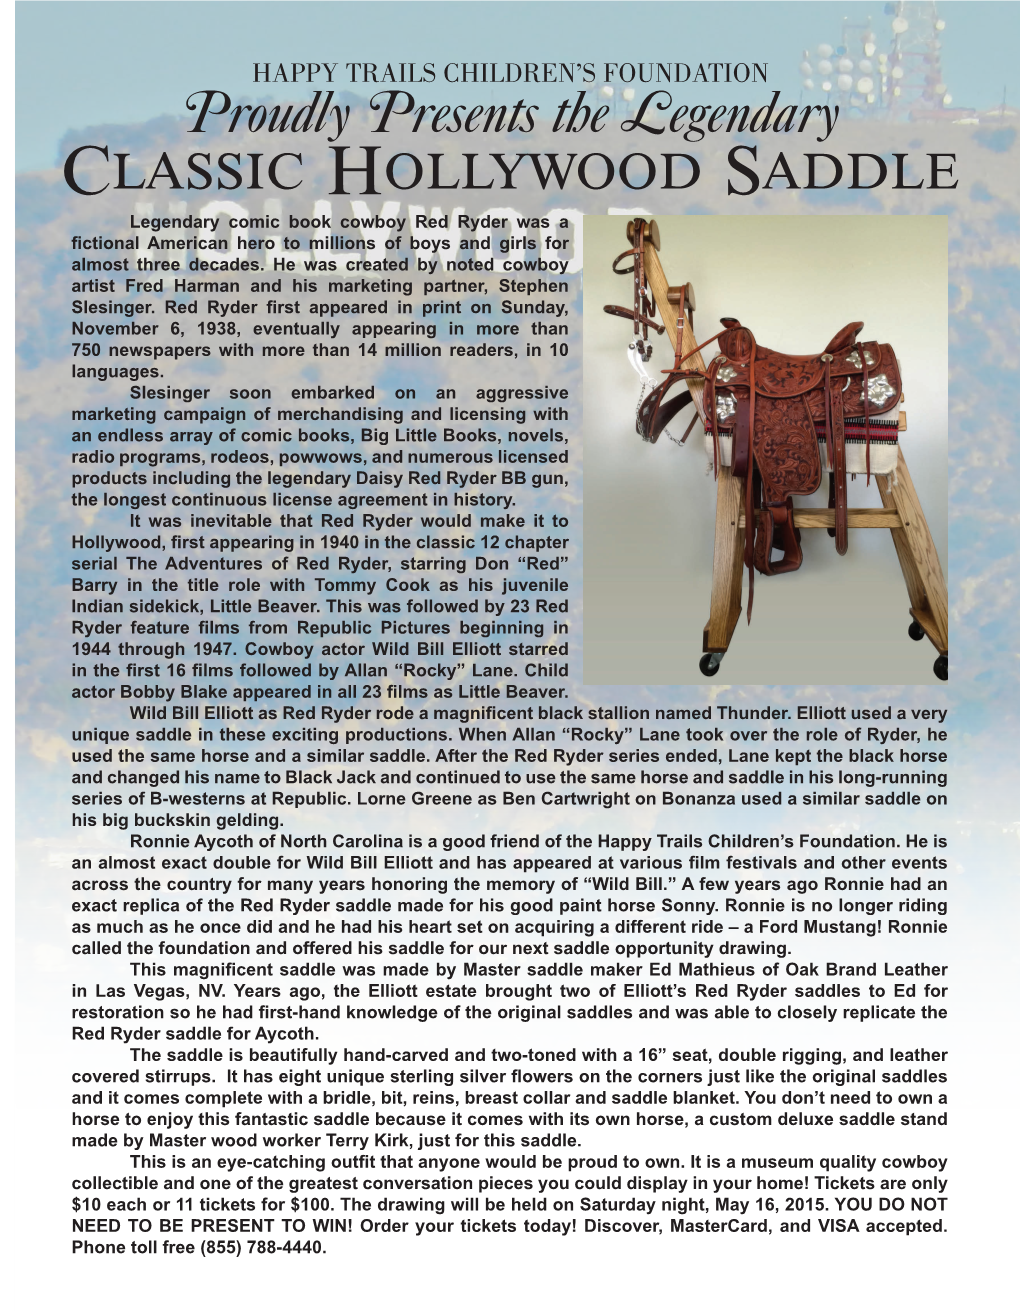 Classic Hollywood Saddle Legendary Comic Book Cowboy Red Ryder Was a Fictional American Hero to Millions of Boys and Girls for Almost Three Decades